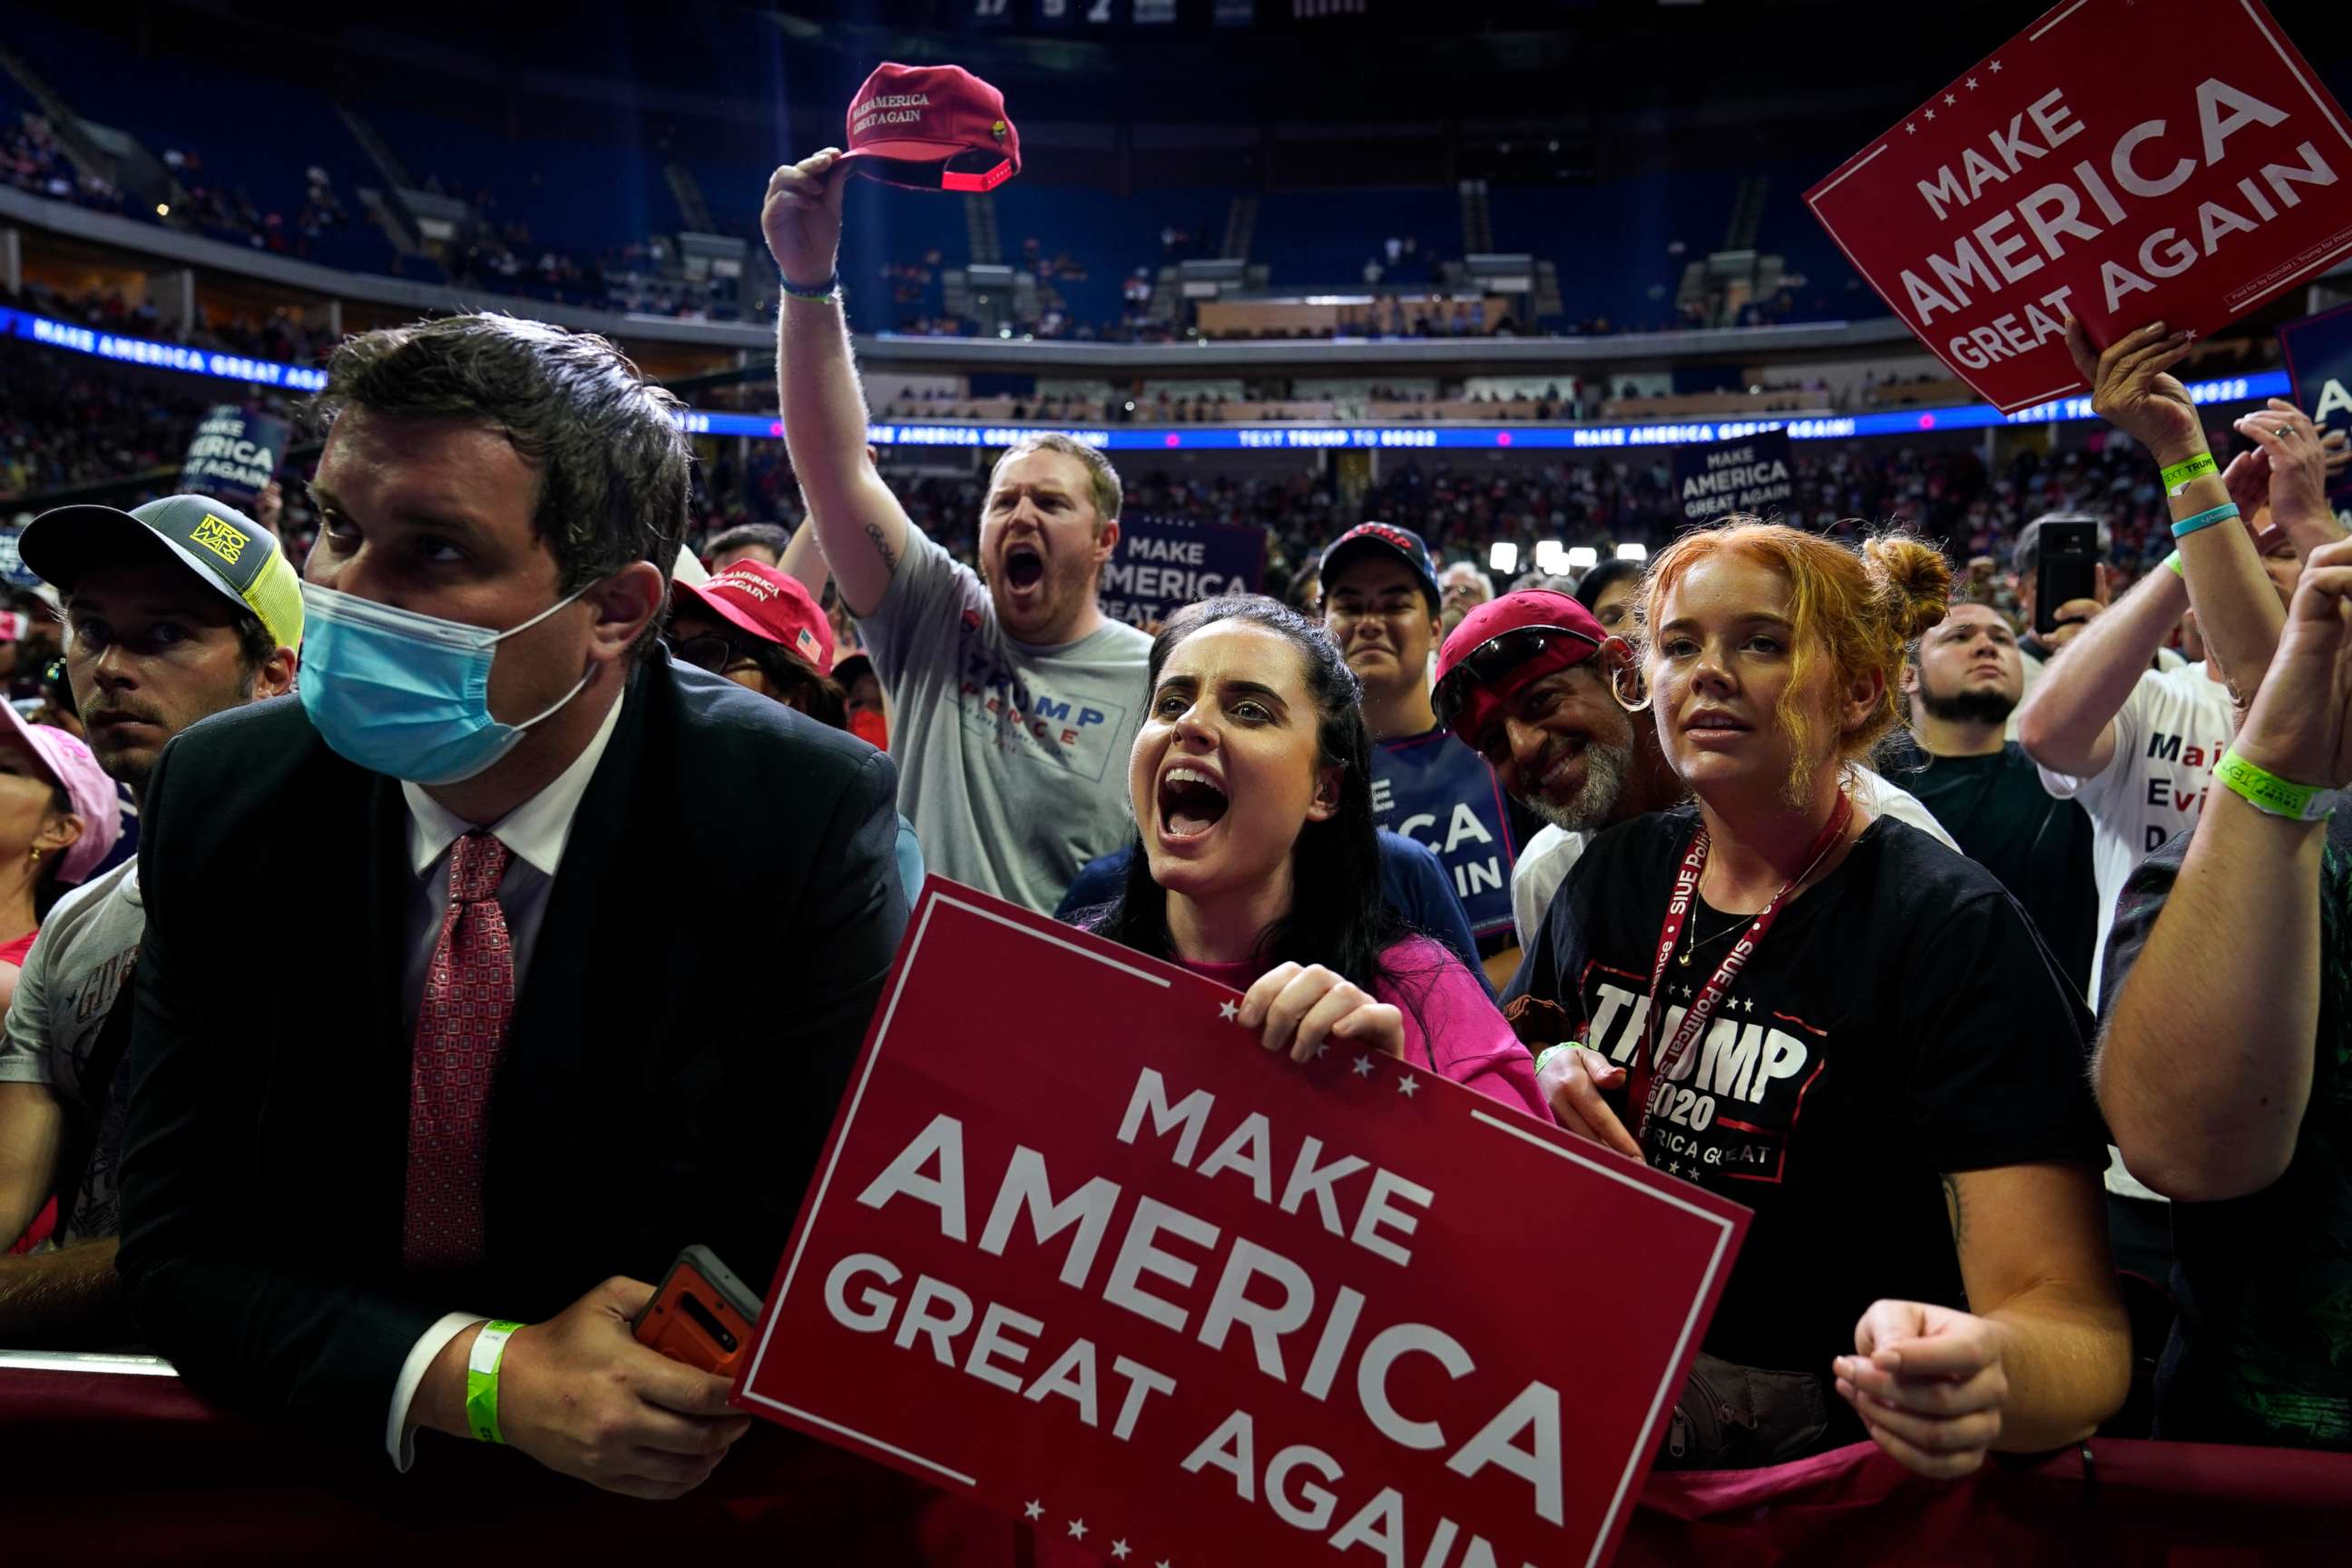 PHOTO: President Donald Trump supporters cheer as they attend a campaign rally at the BOK Center, Saturday, June 20, 2020, in Tulsa, Okla.